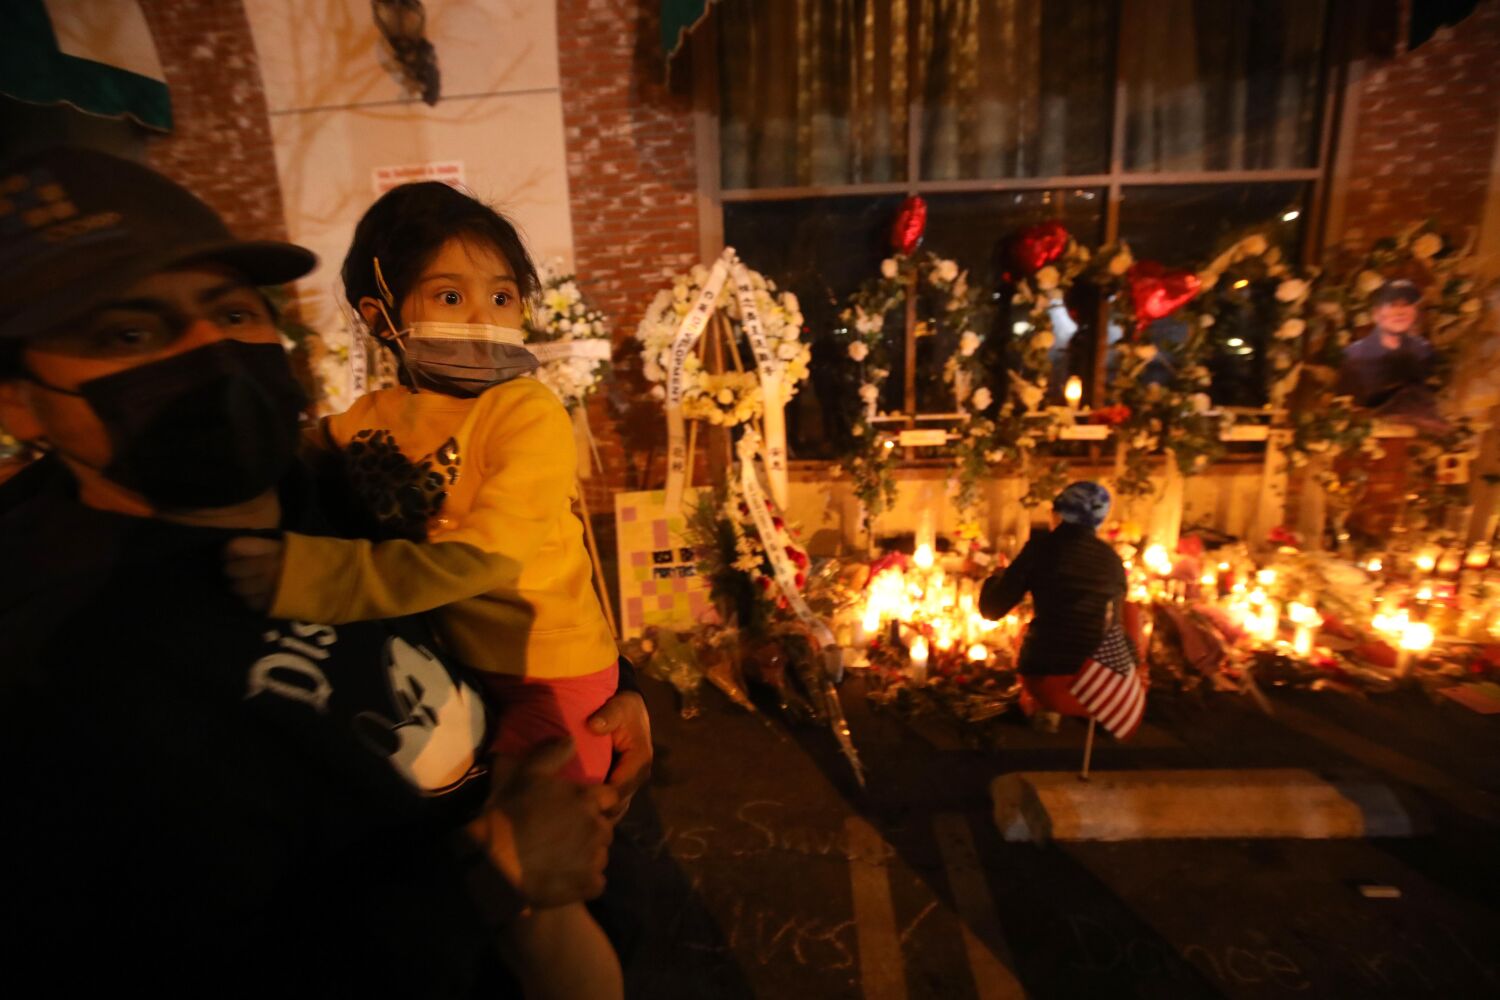 Alhambra prepares for Lunar New Year Festival and 'healing' after mass shooting